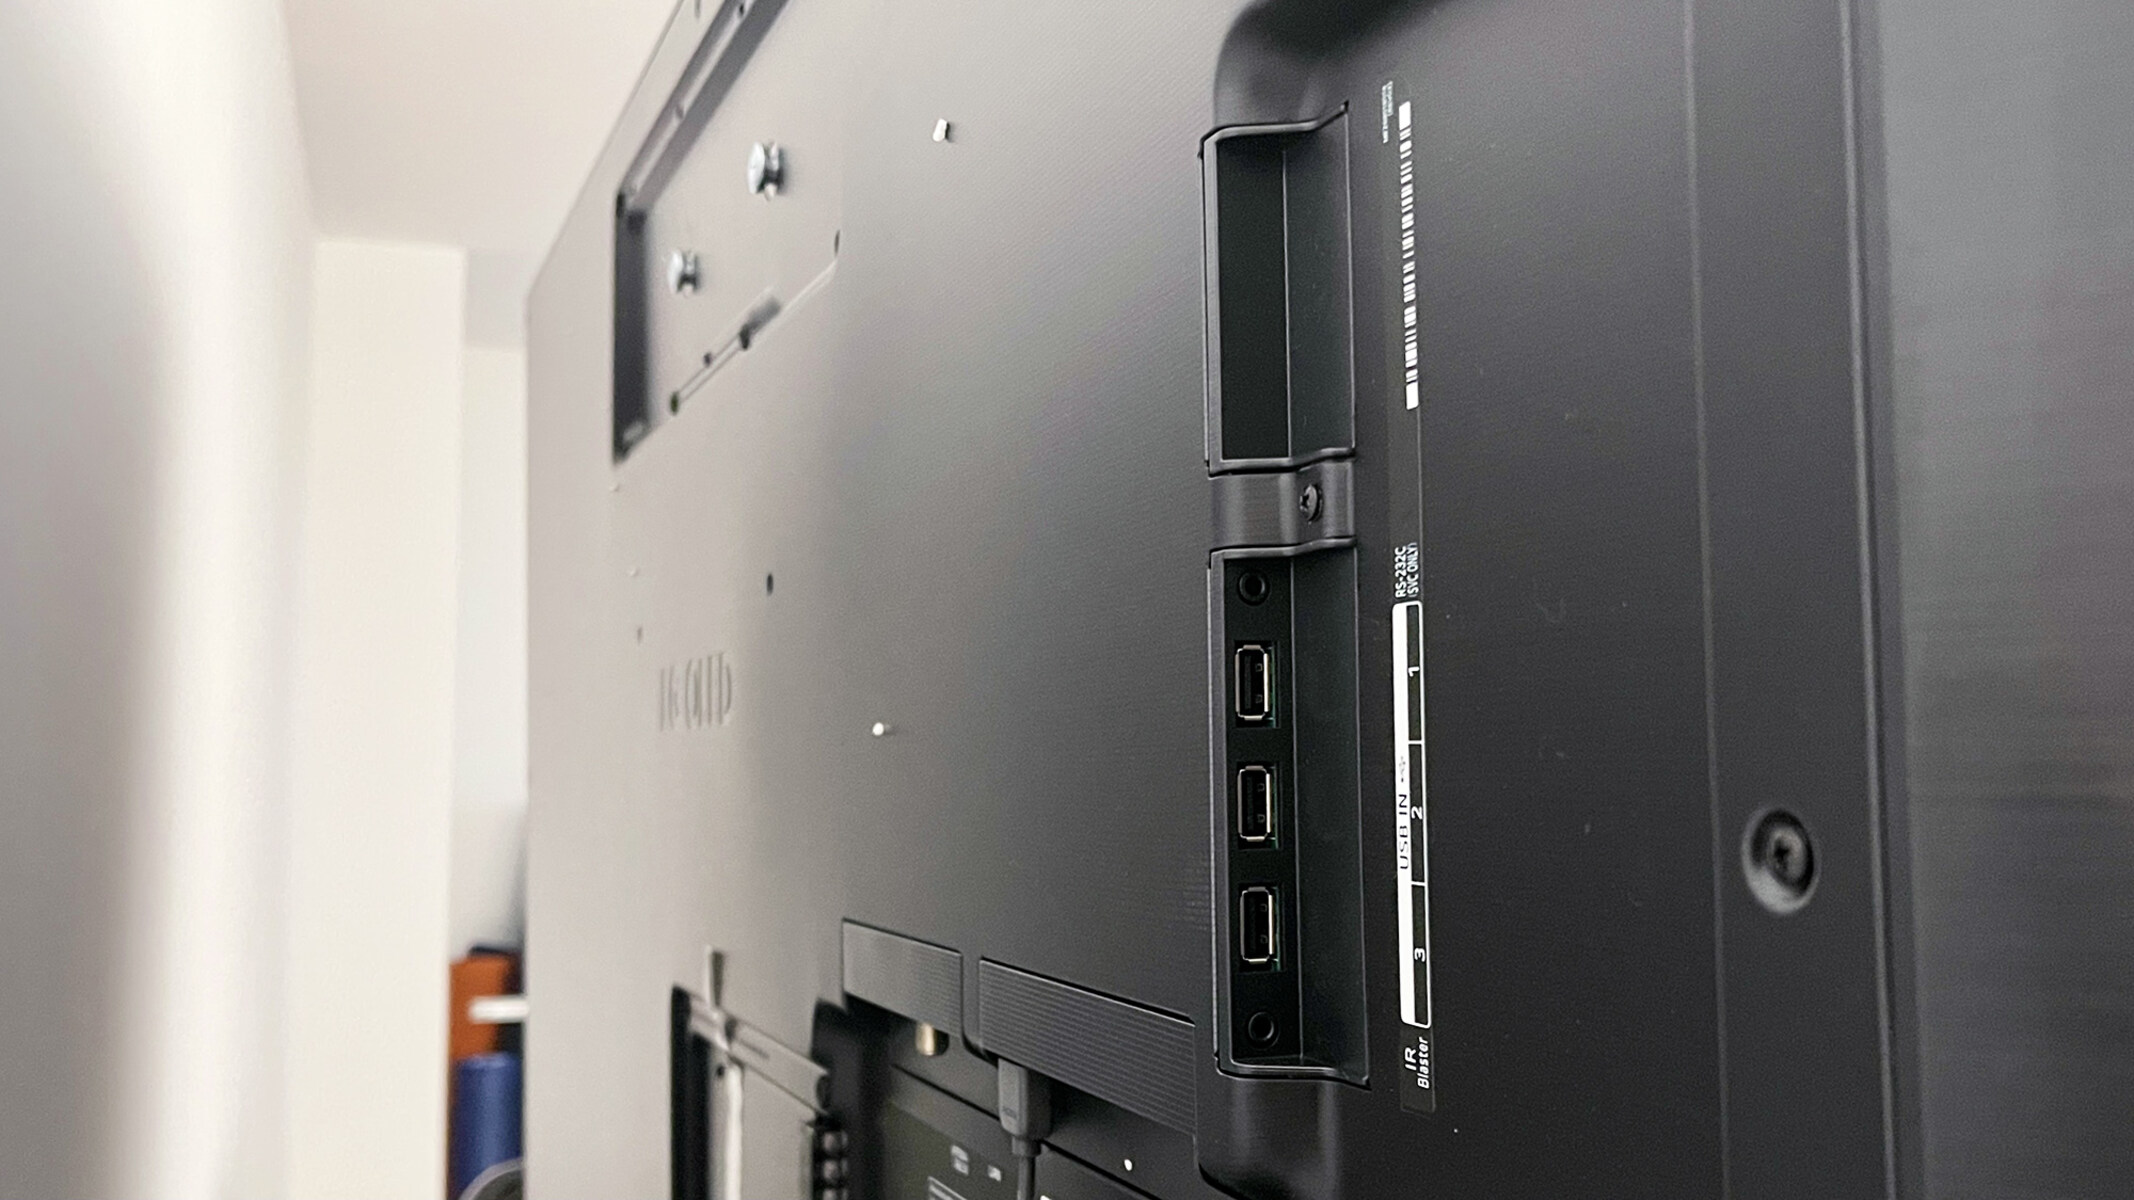 How To Add More HDMI Ports To Tv